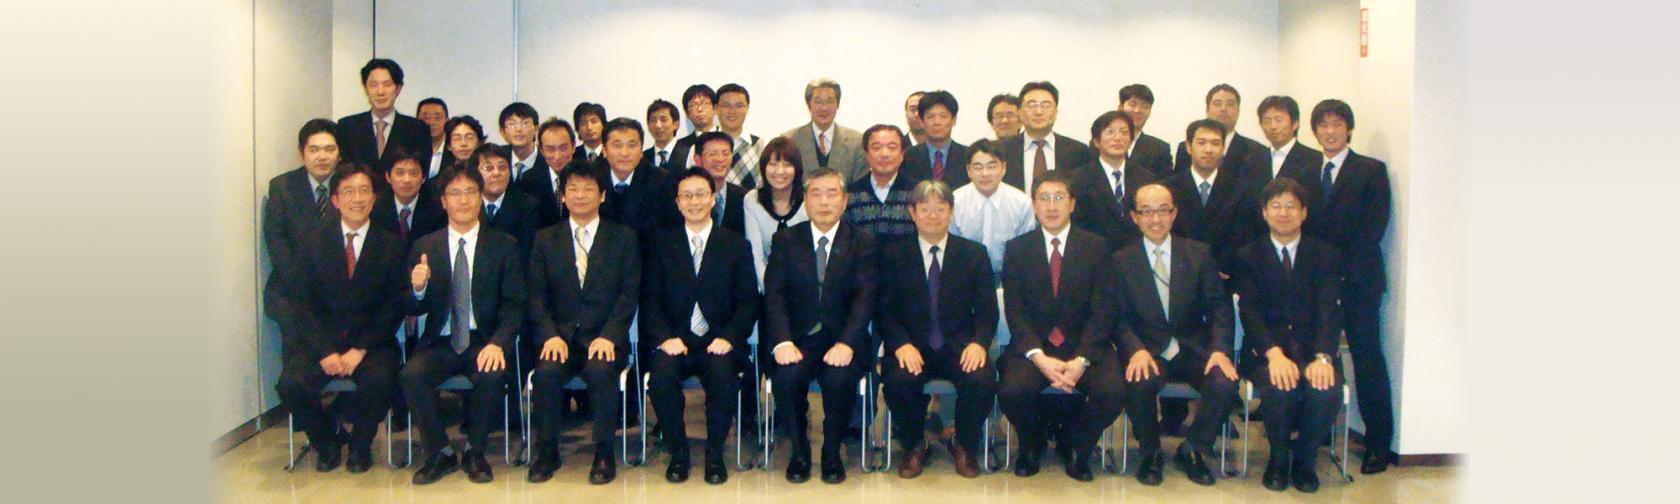 Send-off party for a project in China (in February 2010, front row, fourth from the left)